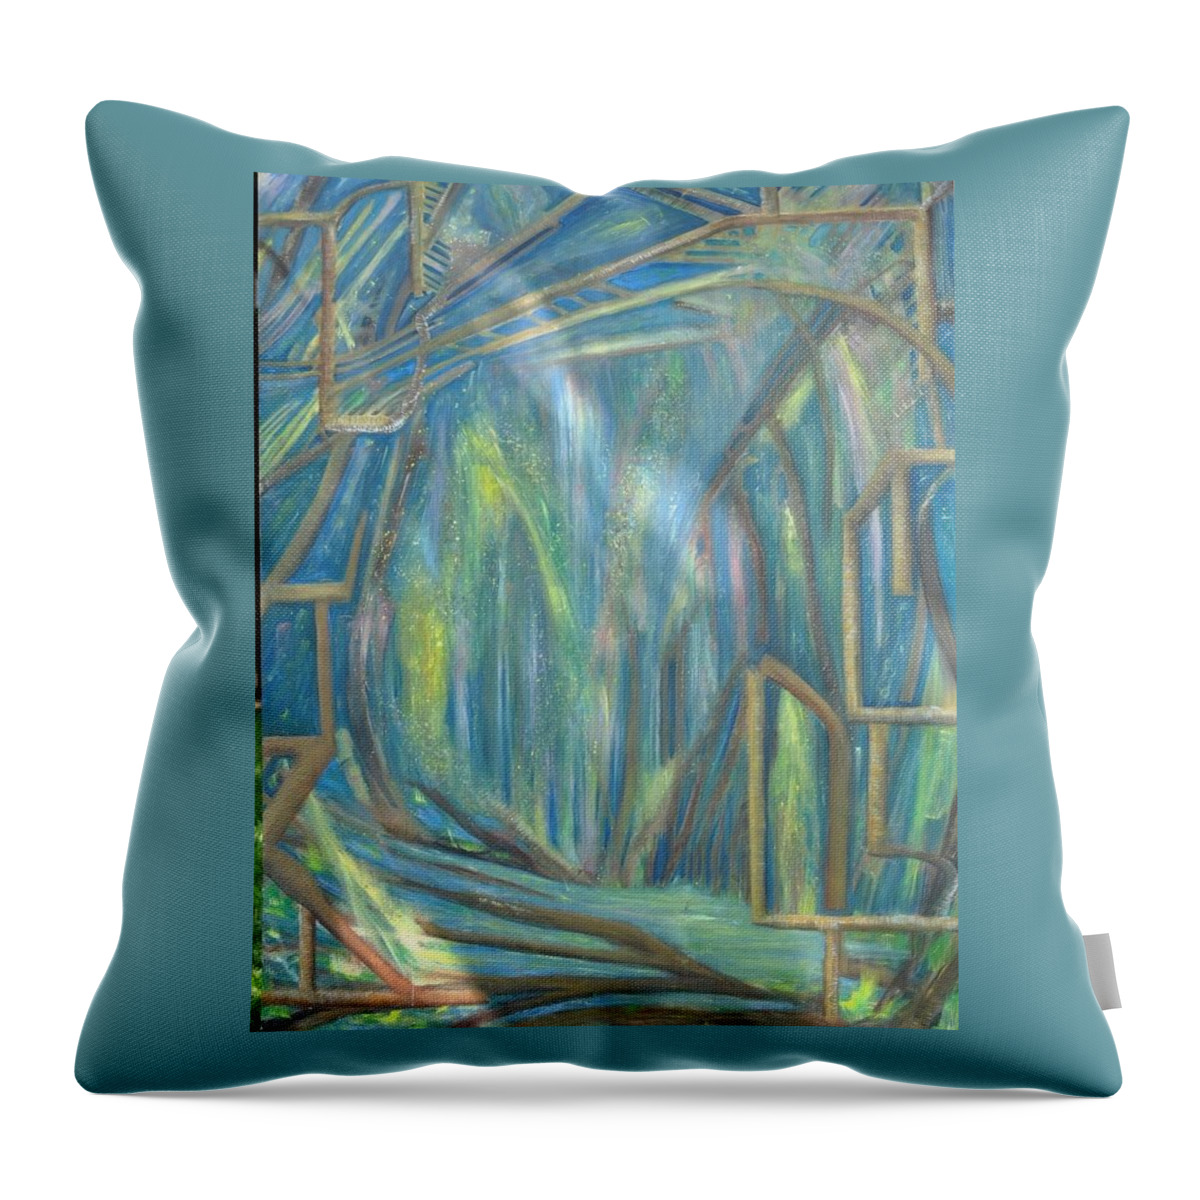 #abstractnature #coolabtractpaintings #abstractart #abstractartforsale #camvasartprints #originalartforsale #abstractartpaintings Throw Pillow featuring the painting Abstract Nature by Cynthia Silverman